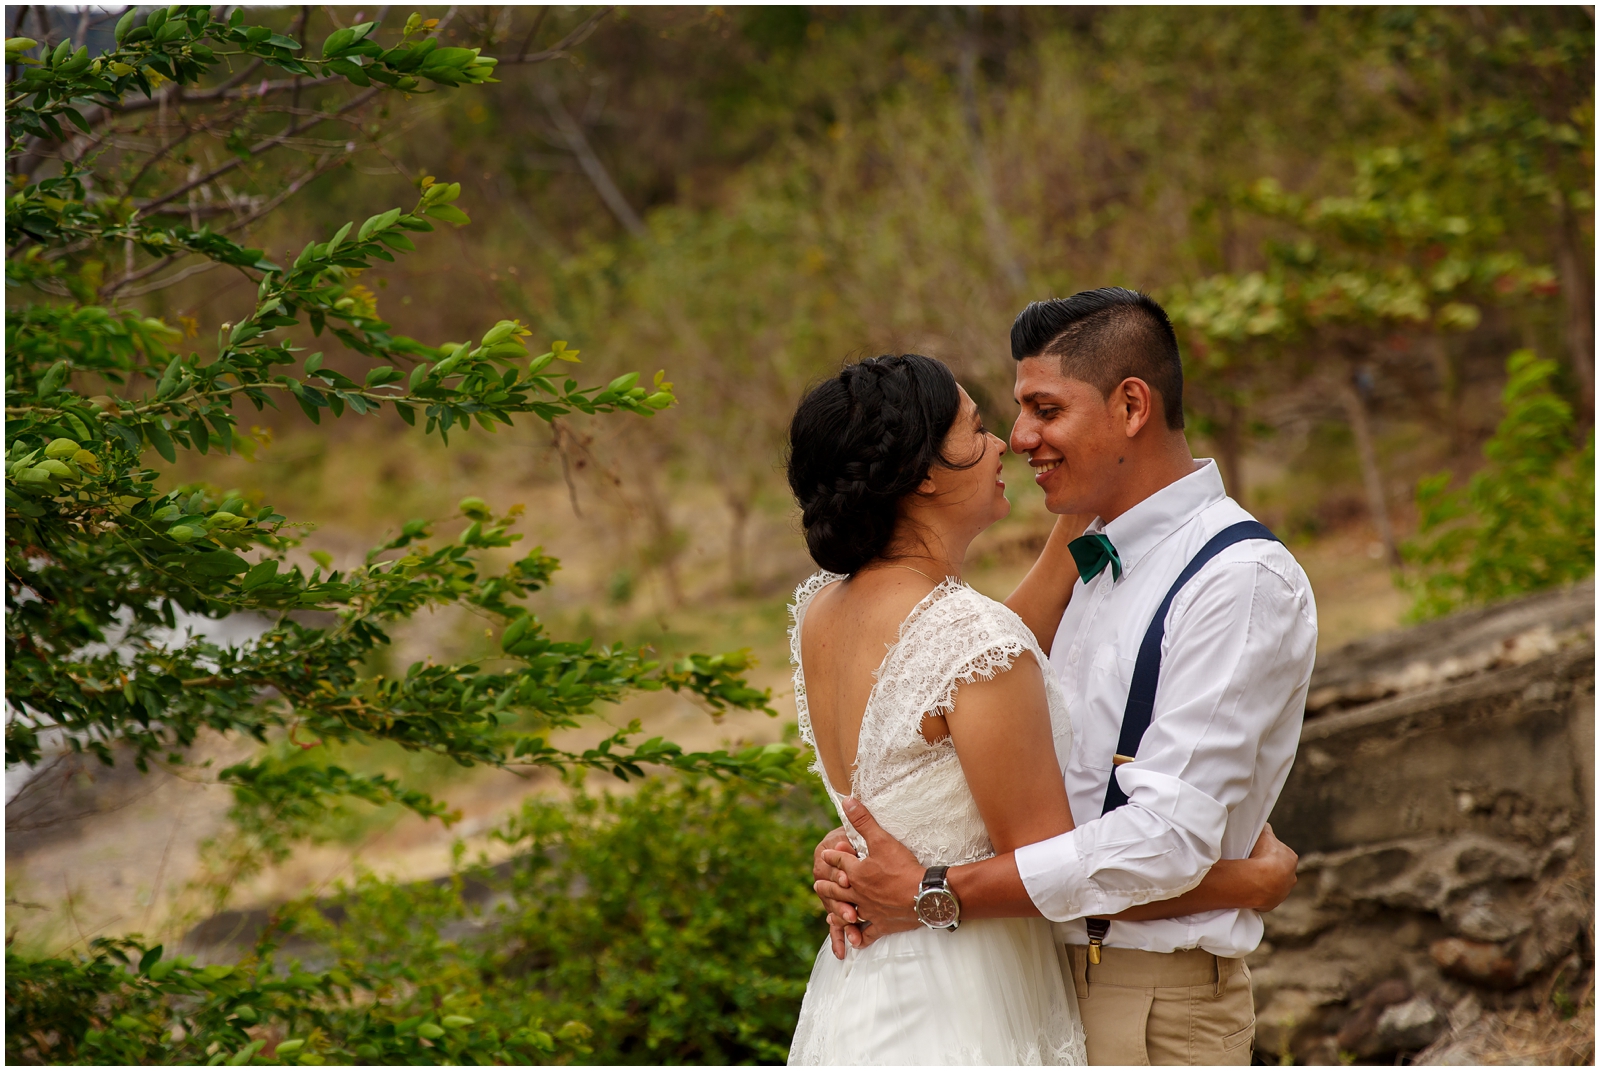 A bride and groom lakeside during their Nicaraguan intimate wedding.